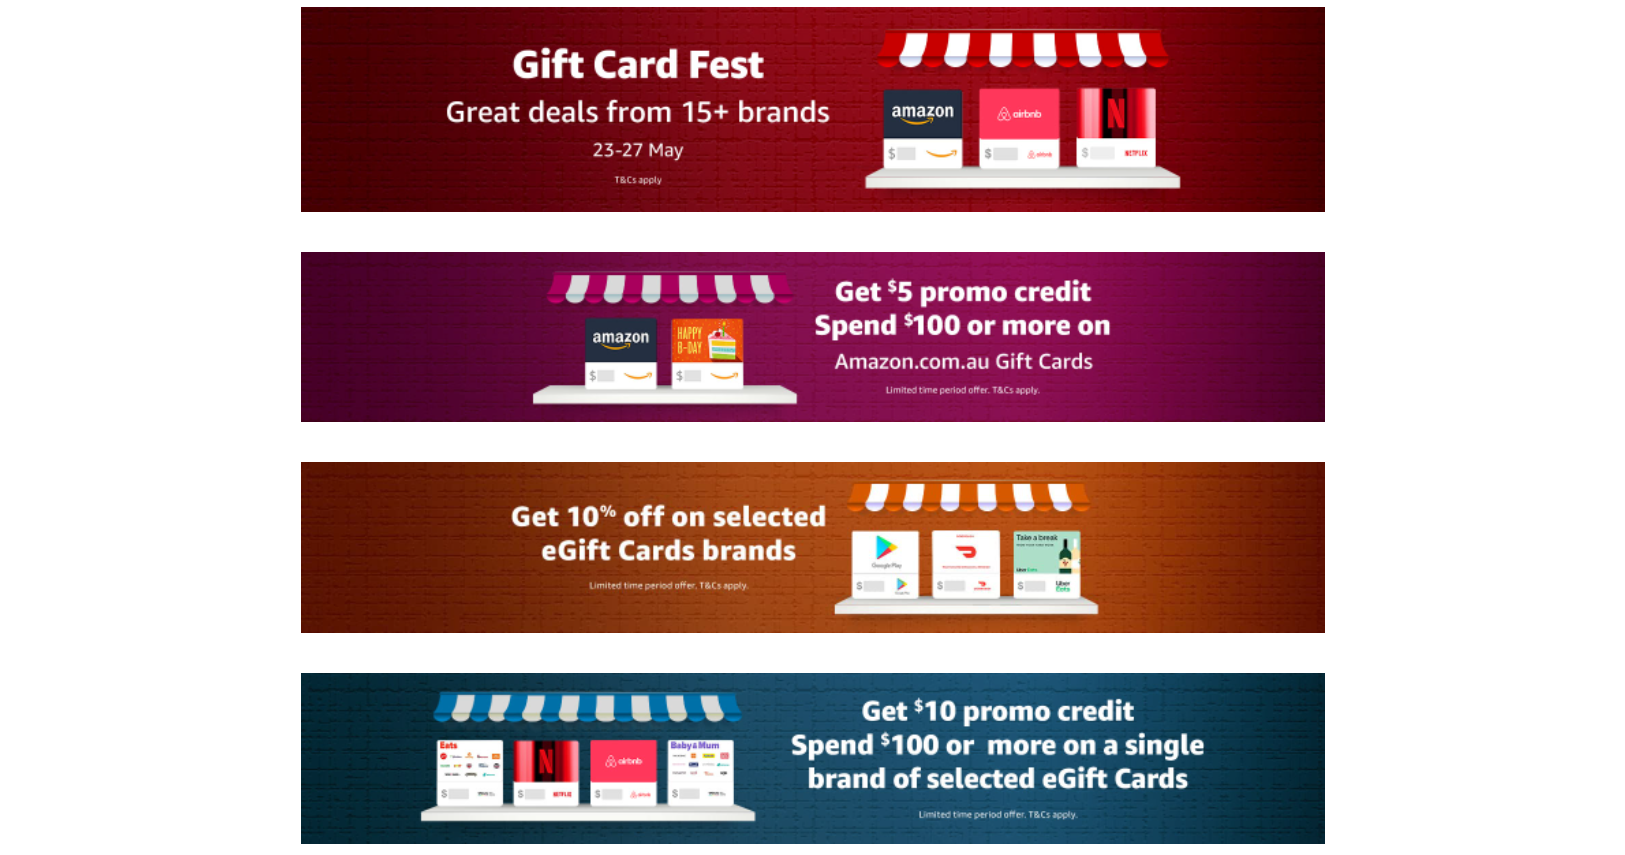 Amazon Gift card Fest - 10% OFF or up to $10 promo credit on eGift cards from 15+ brands